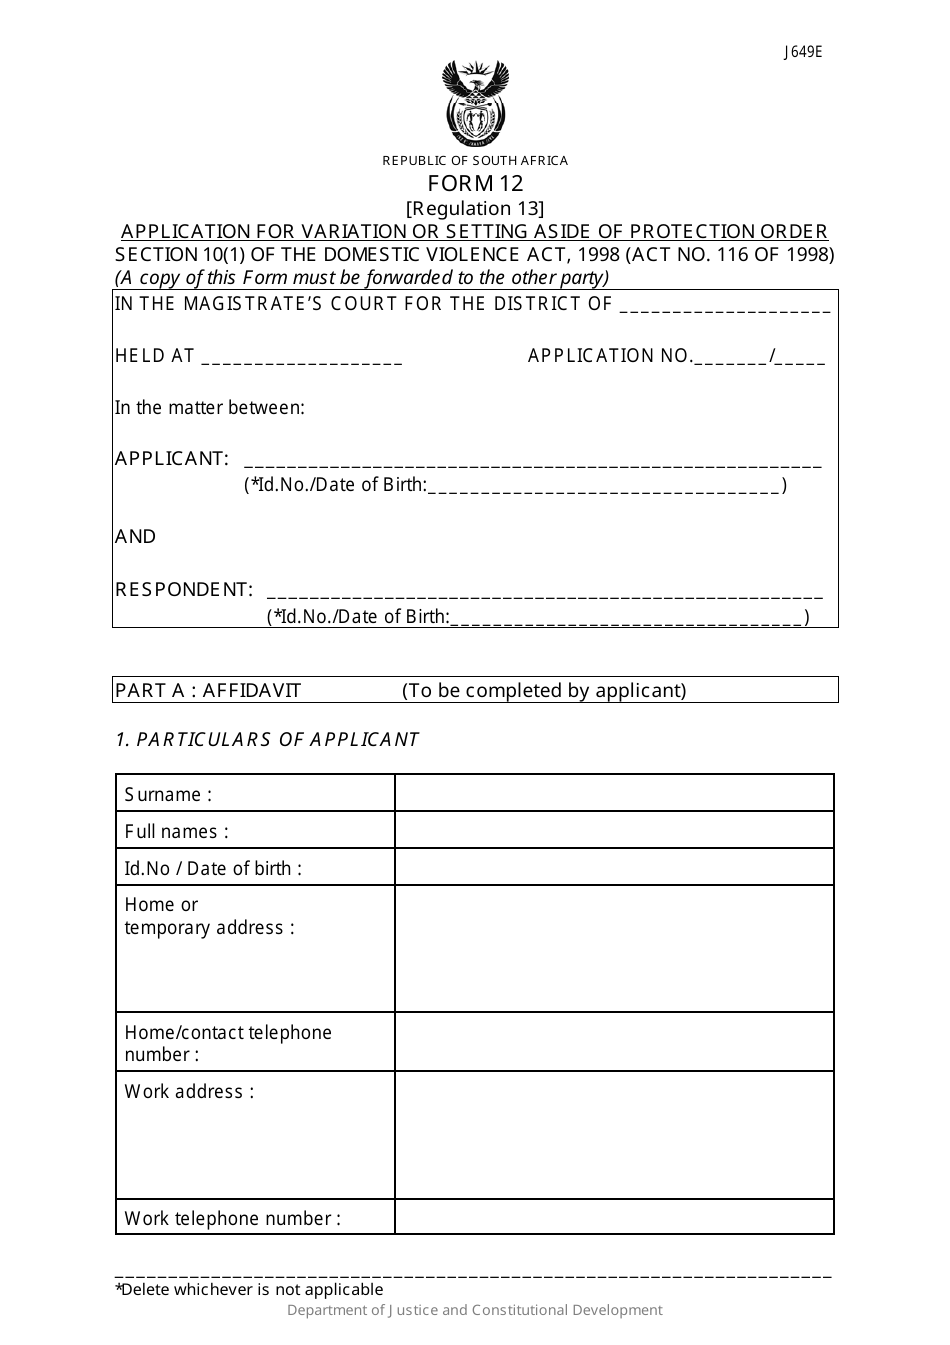 Form 12 Application for Variation or Setting Aside or Protection Order - South Africa, Page 1